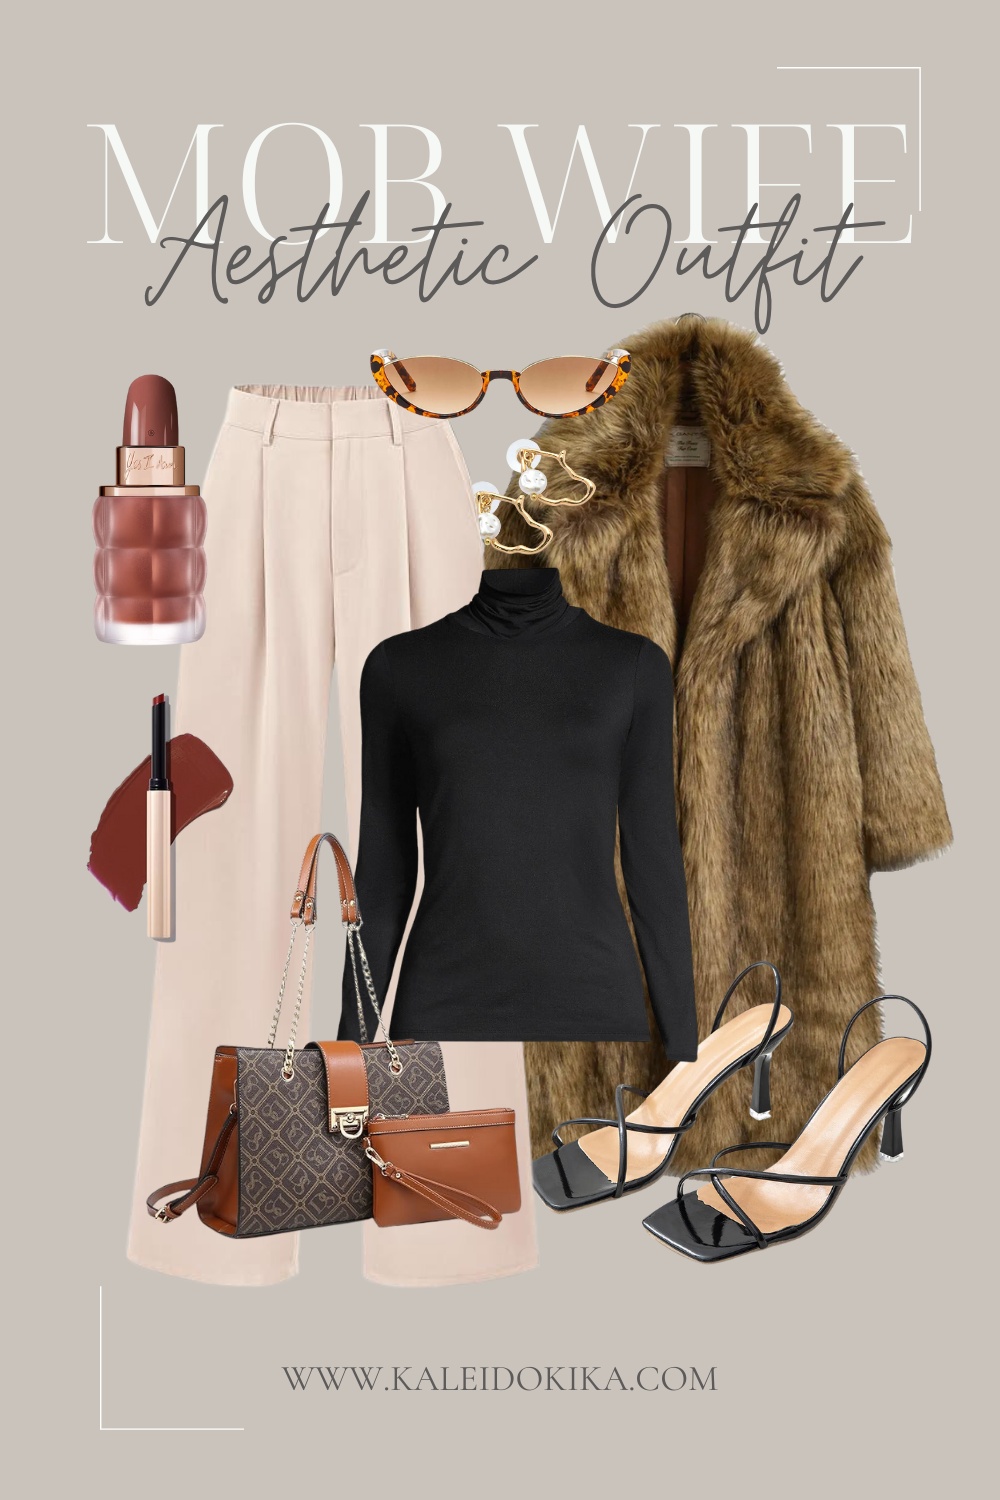 Image showing a mob wife aesthetic outfit